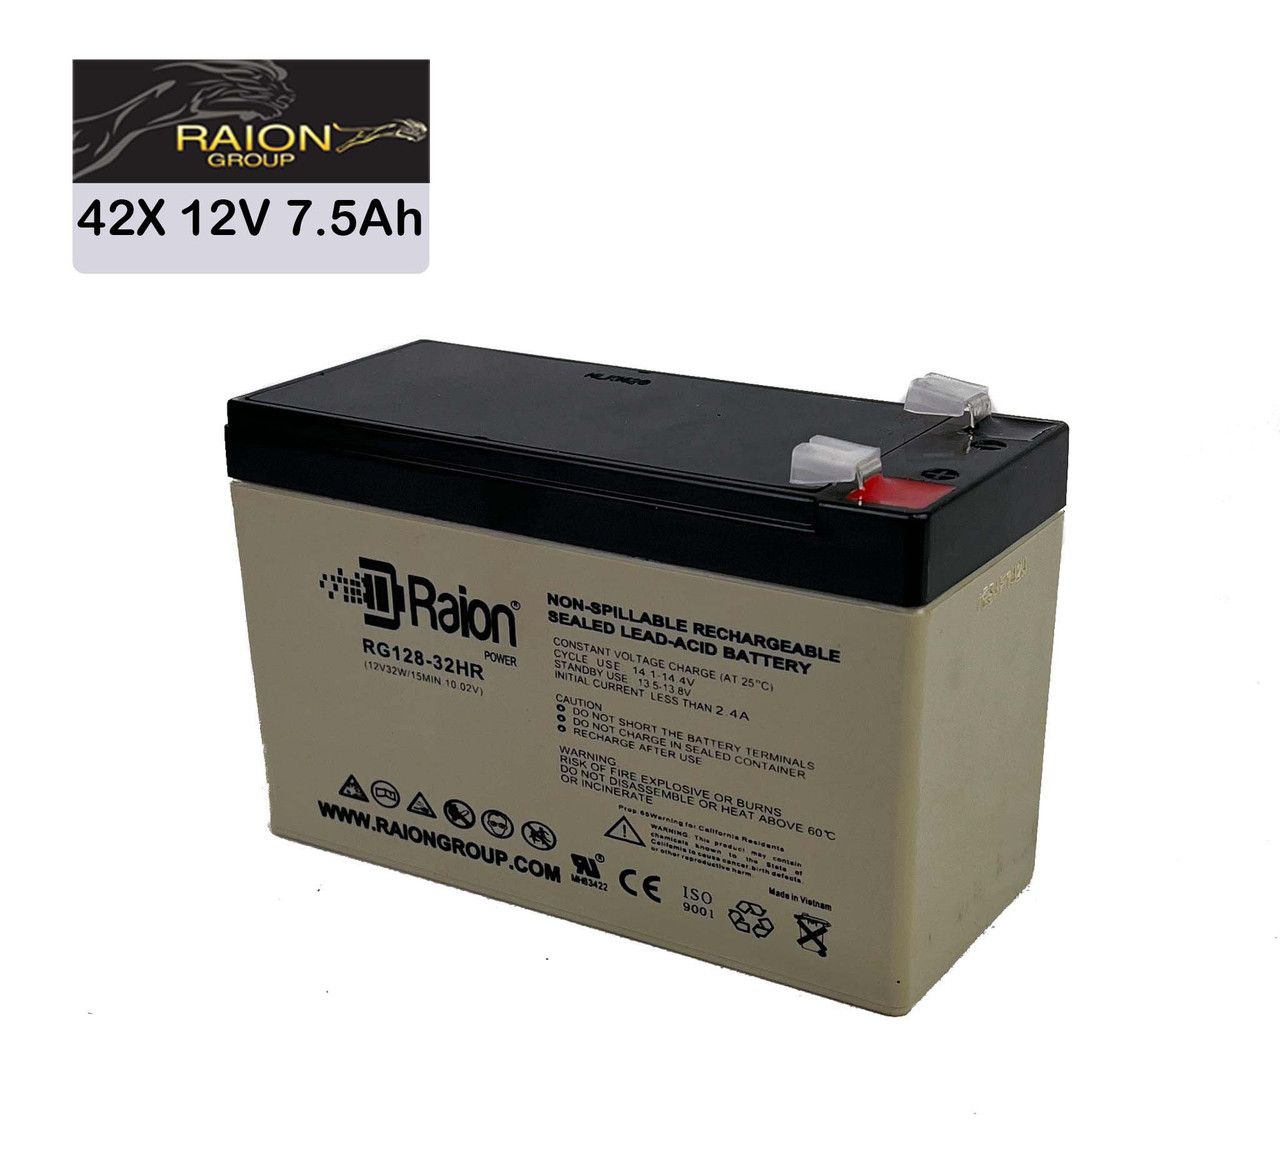 Raion Power 12V 7.5Ah High Rate Discharge UPS Batteries for Toshiba UC3G2L080C6 - 42 Pack